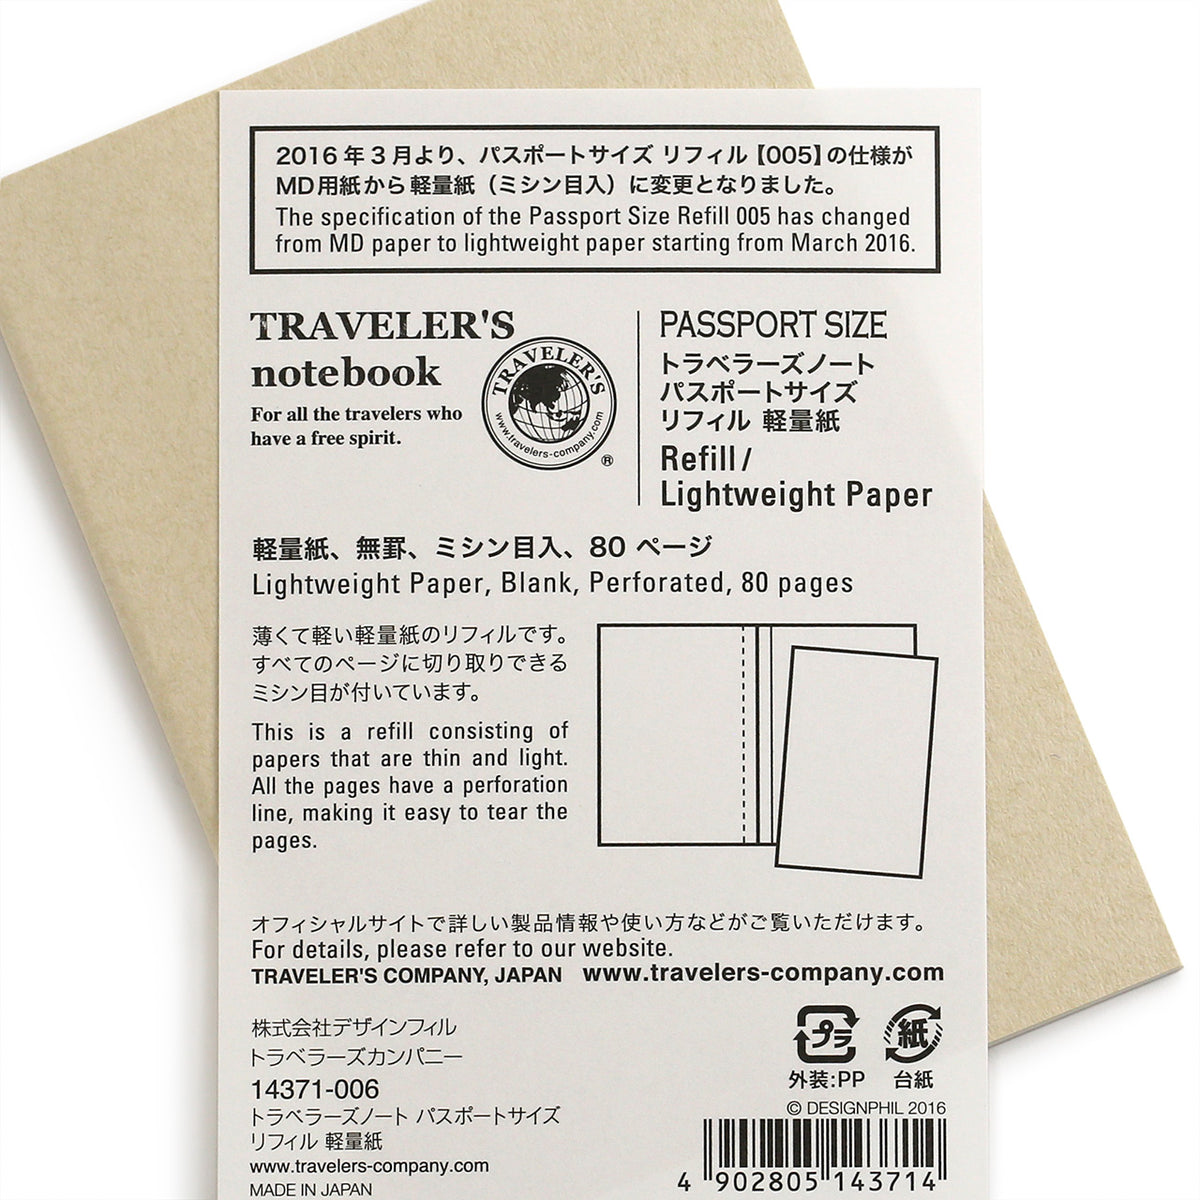 information sheet for lightweight refill paper,,blank, perforated 80 pages